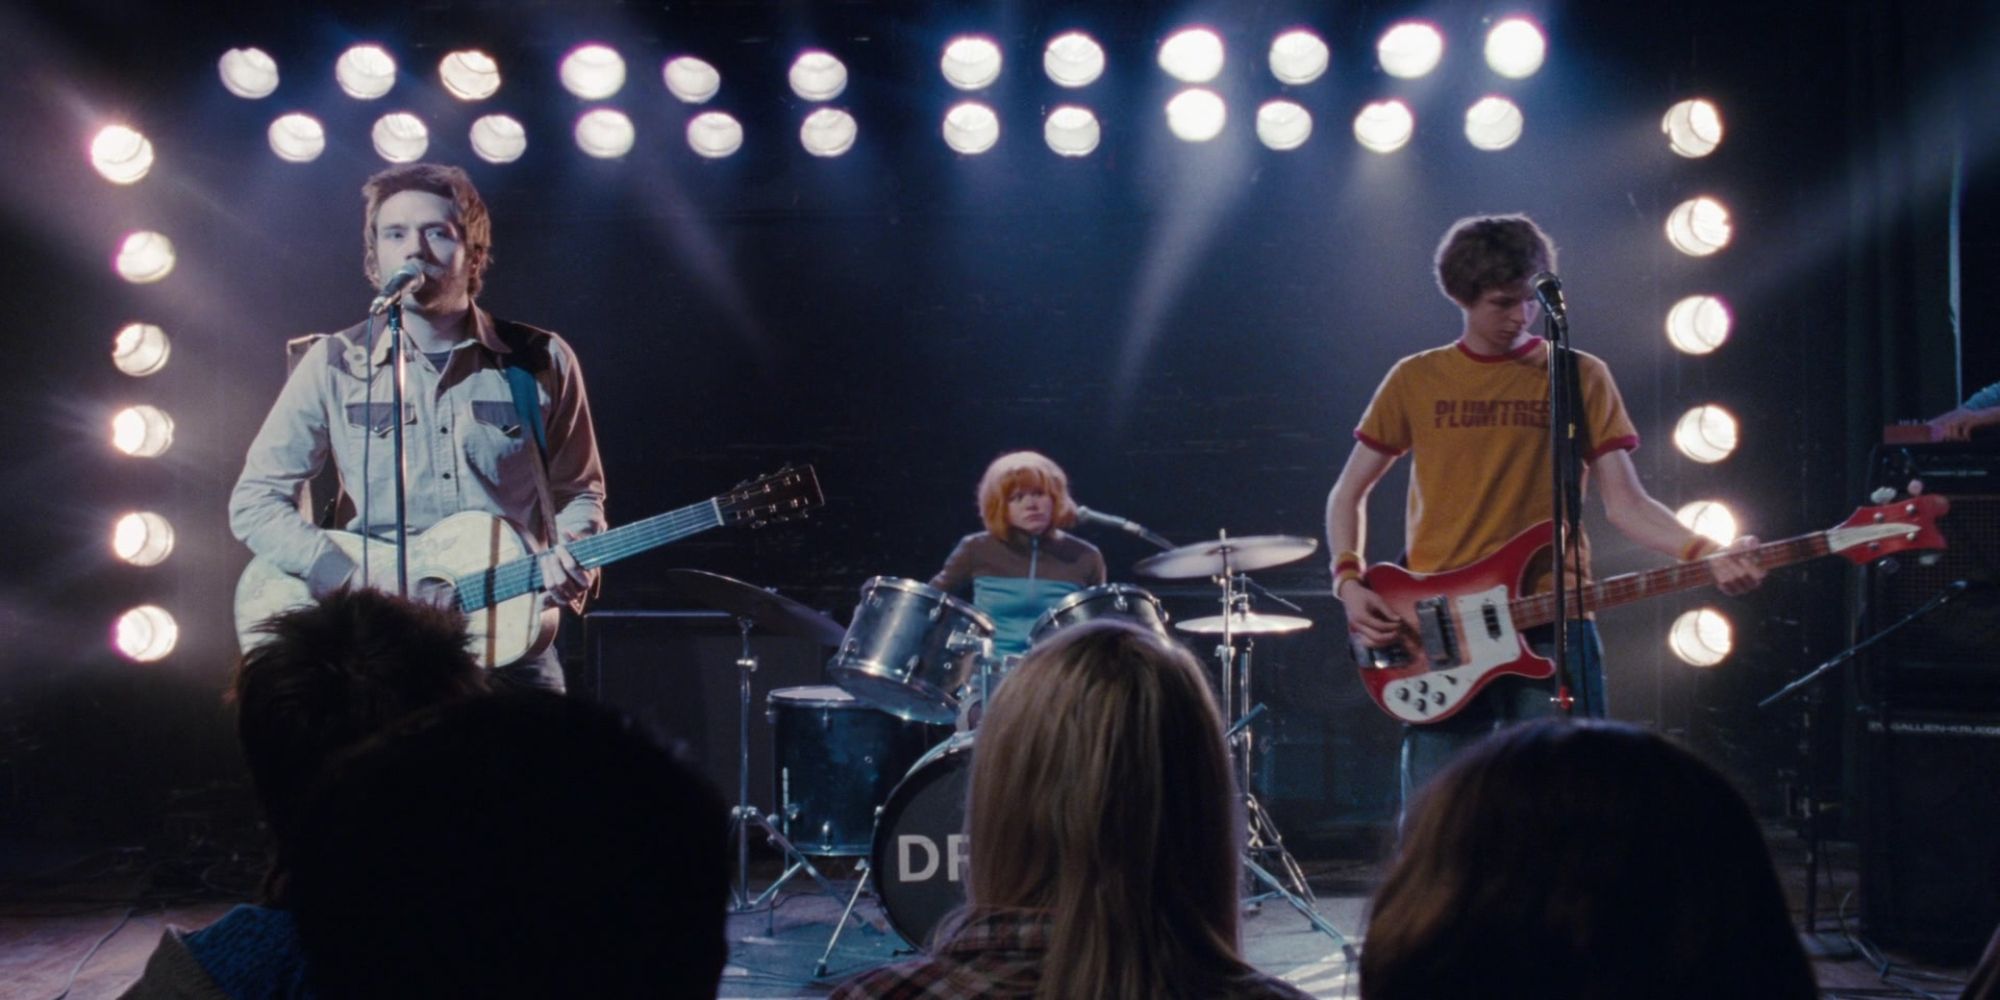 Sex Bob-omb plays a song onstage in Scott Pilgrim vs. the World.